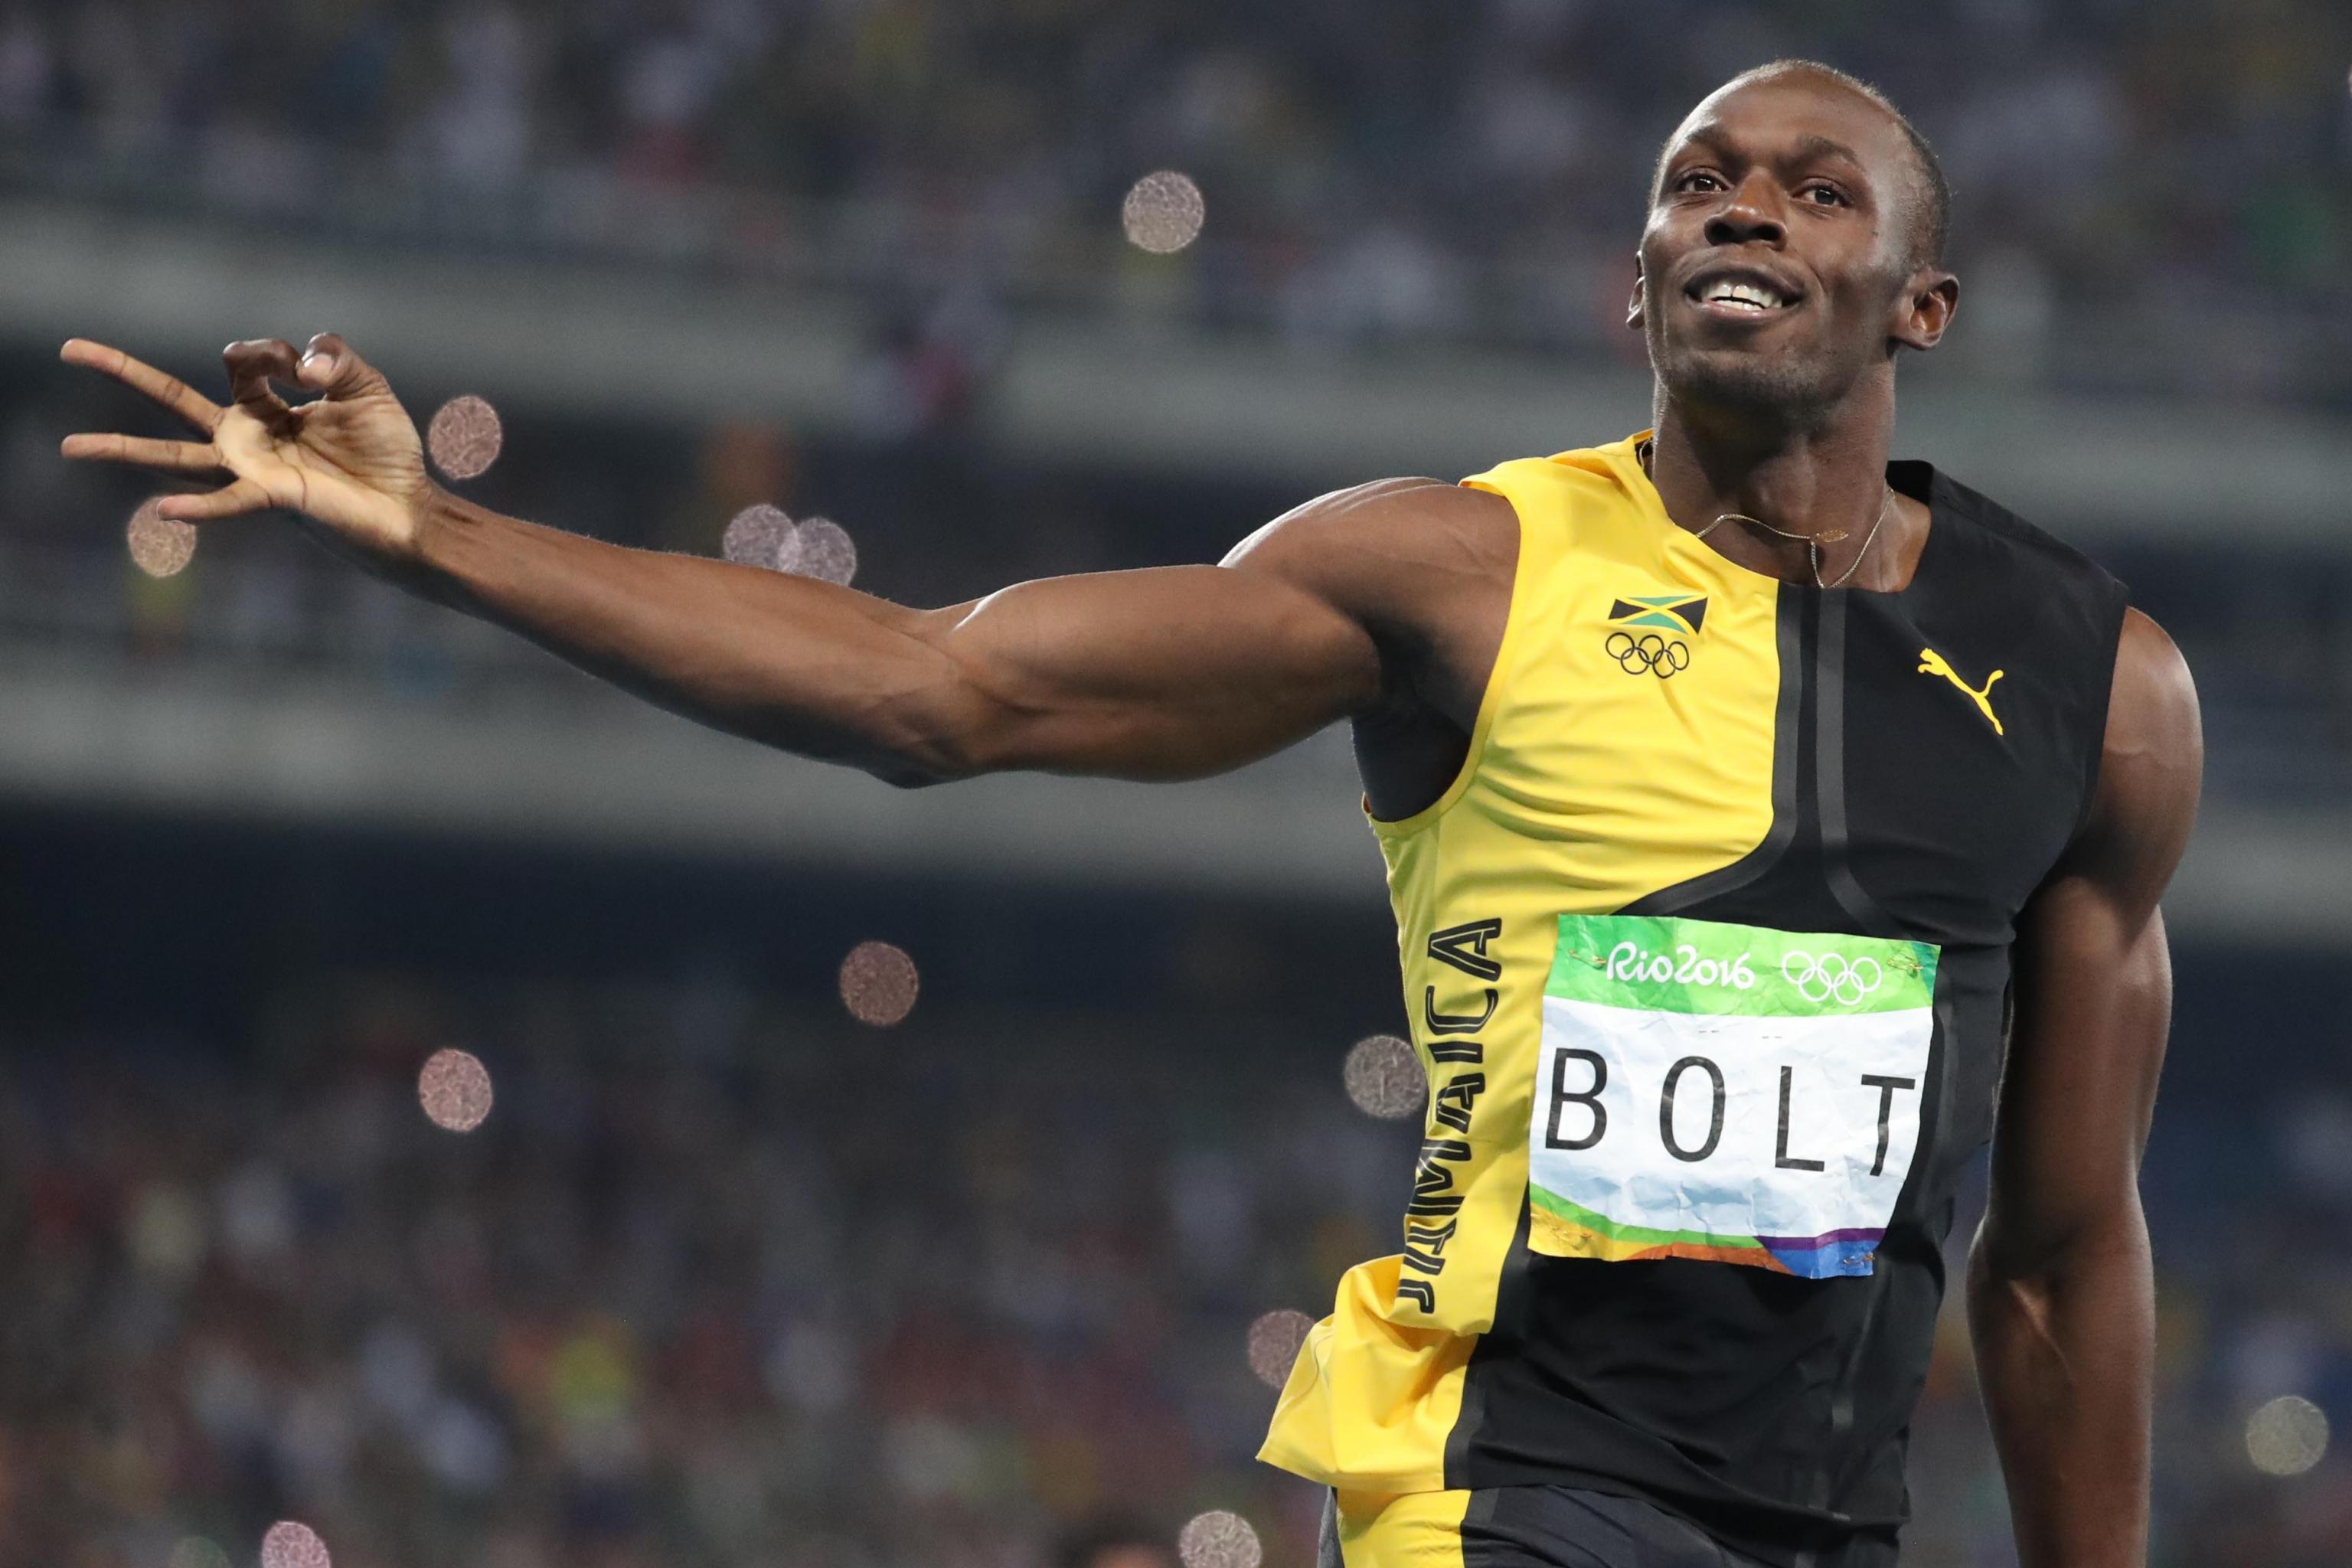 Usain Bolt says he's been offered to play WR in the NFL, rejected